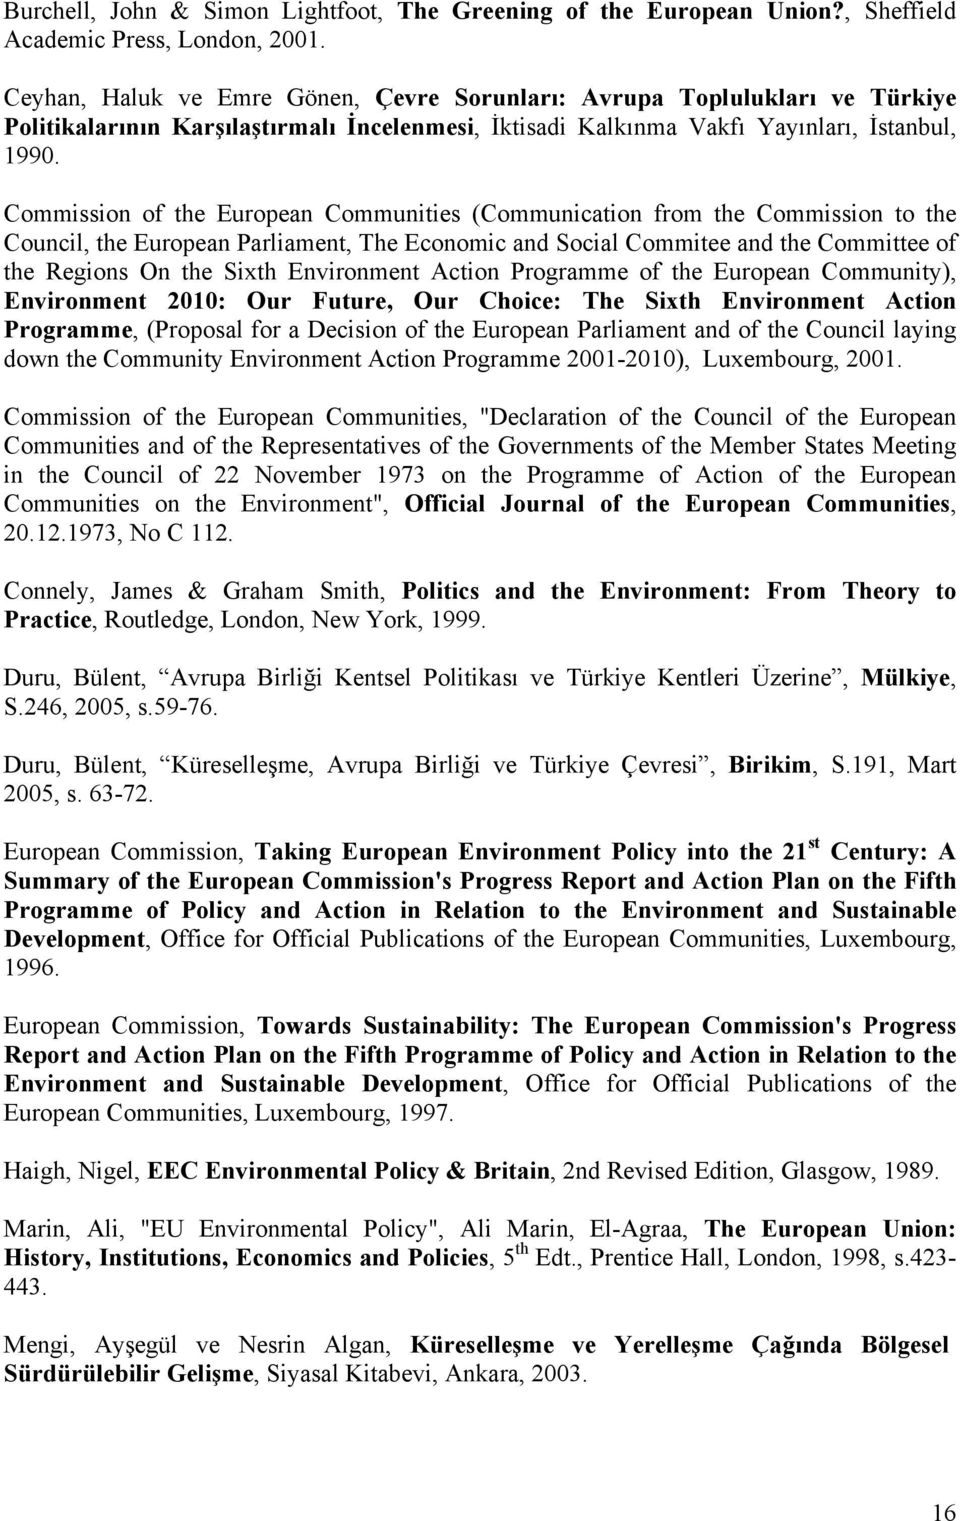 Commission of the European Communities (Communication from the Commission to the Council, the European Parliament, The Economic and Social Commitee and the Committee of the Regions On the Sixth